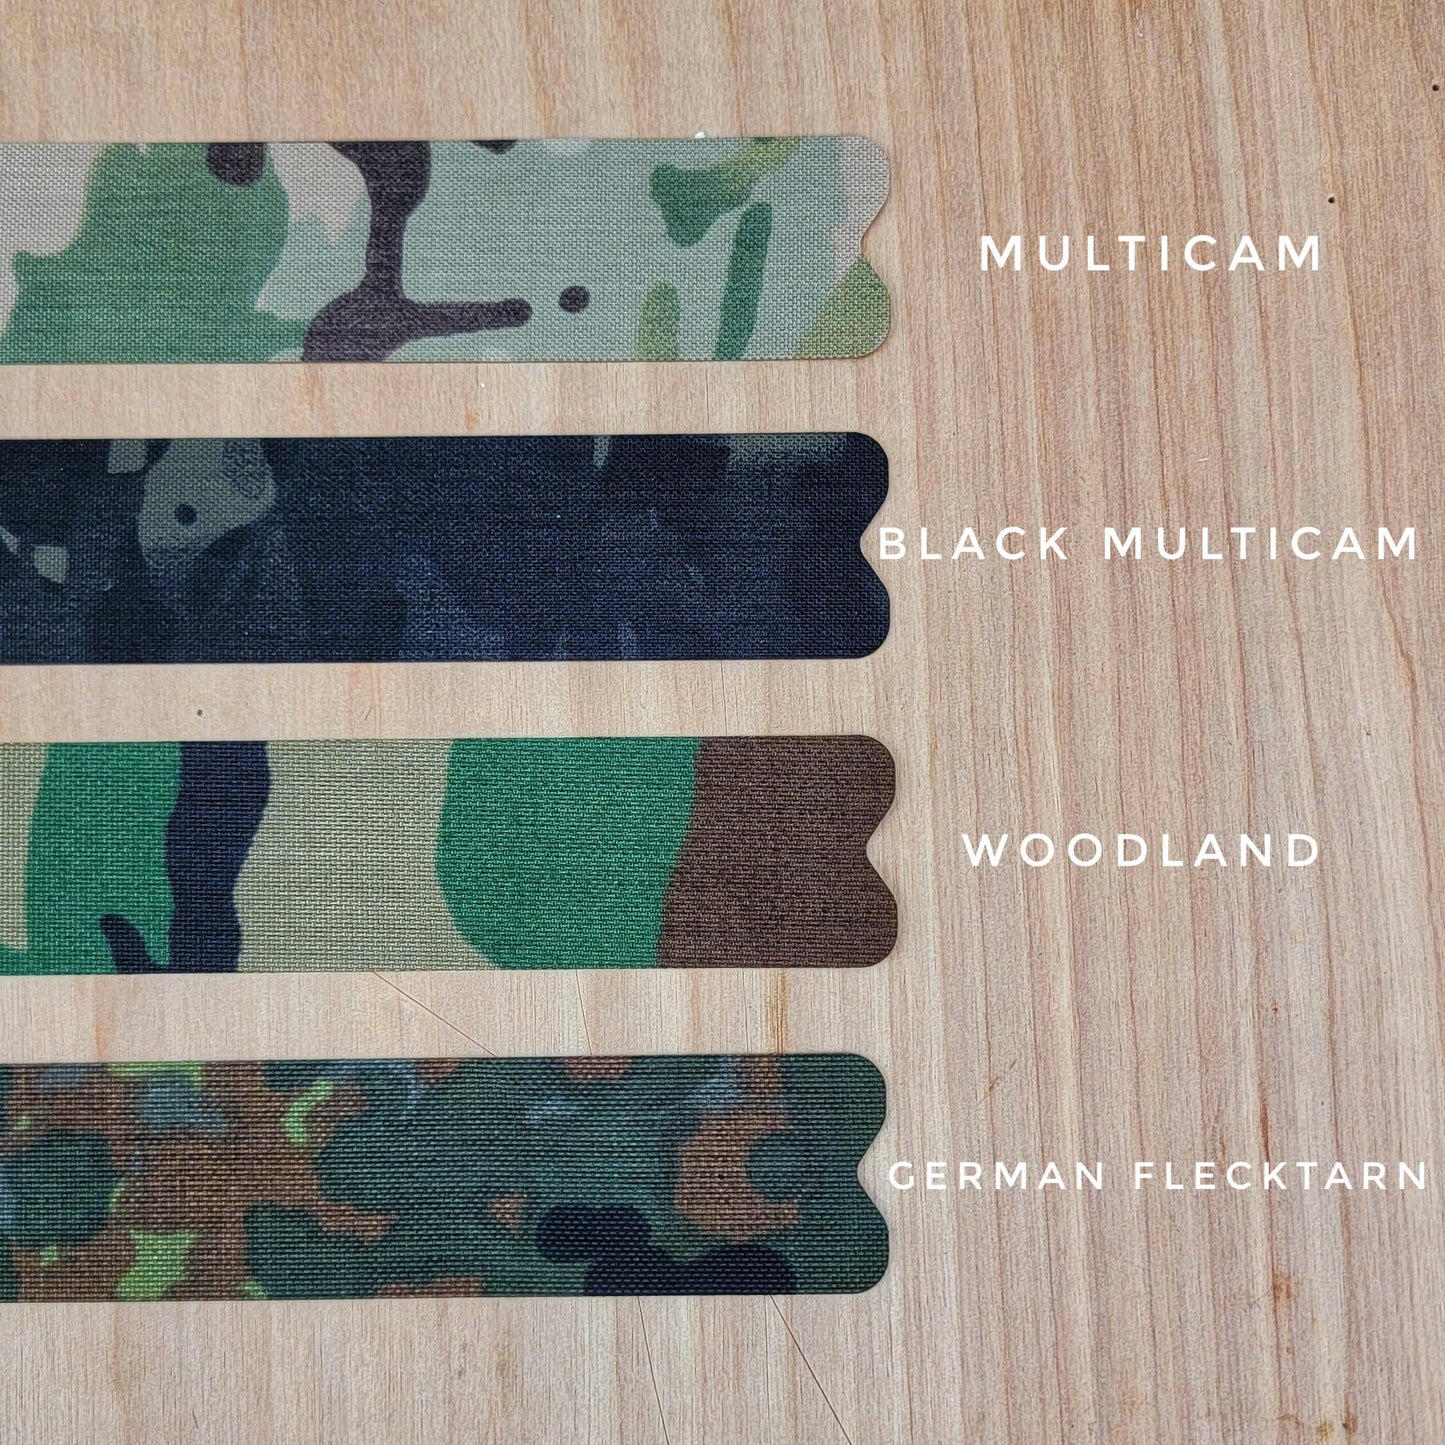 Tact-Wrap "airsoft" stickers, Cordura cheek rest for B&T APC Series or MP5 Stock,  tactical, camo, multicam, holster wrap, decal